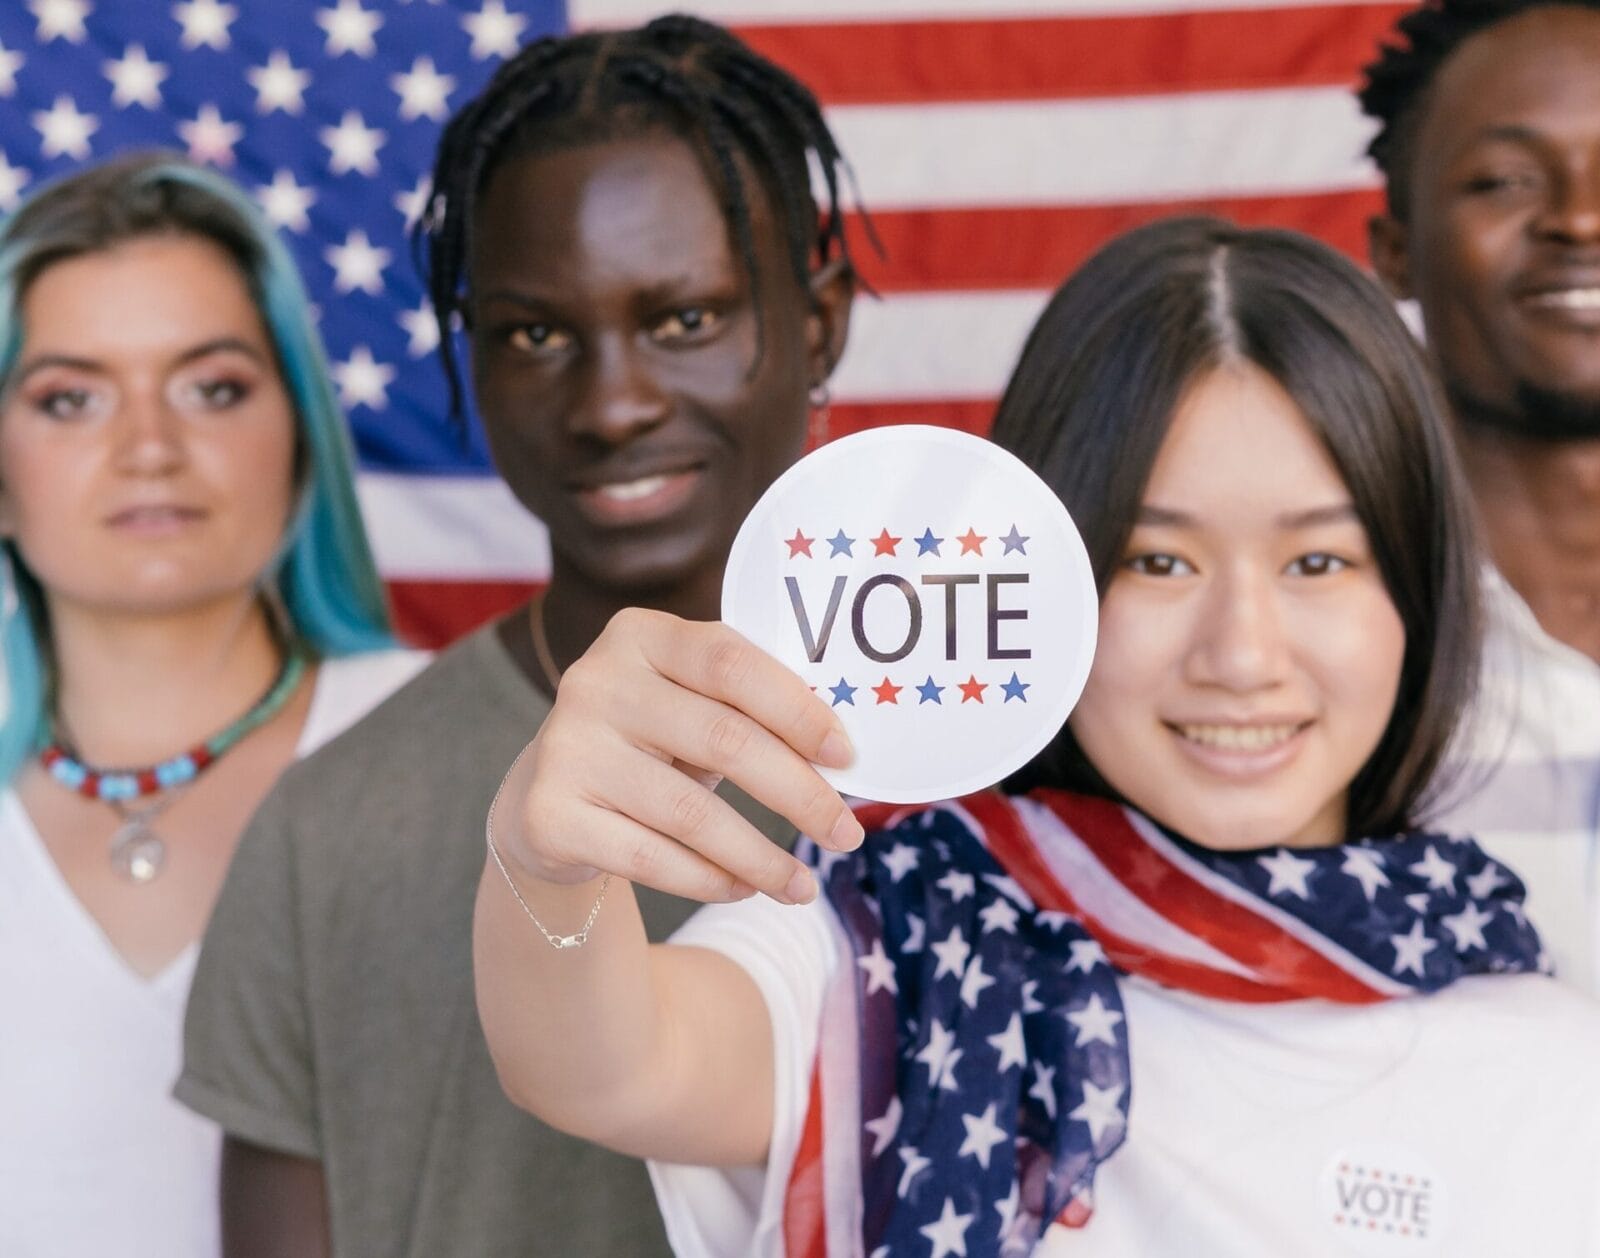 Multi-cultural group of four young people standing in front of an American flag. The female-presenting person is holding up a "vote" sticker.